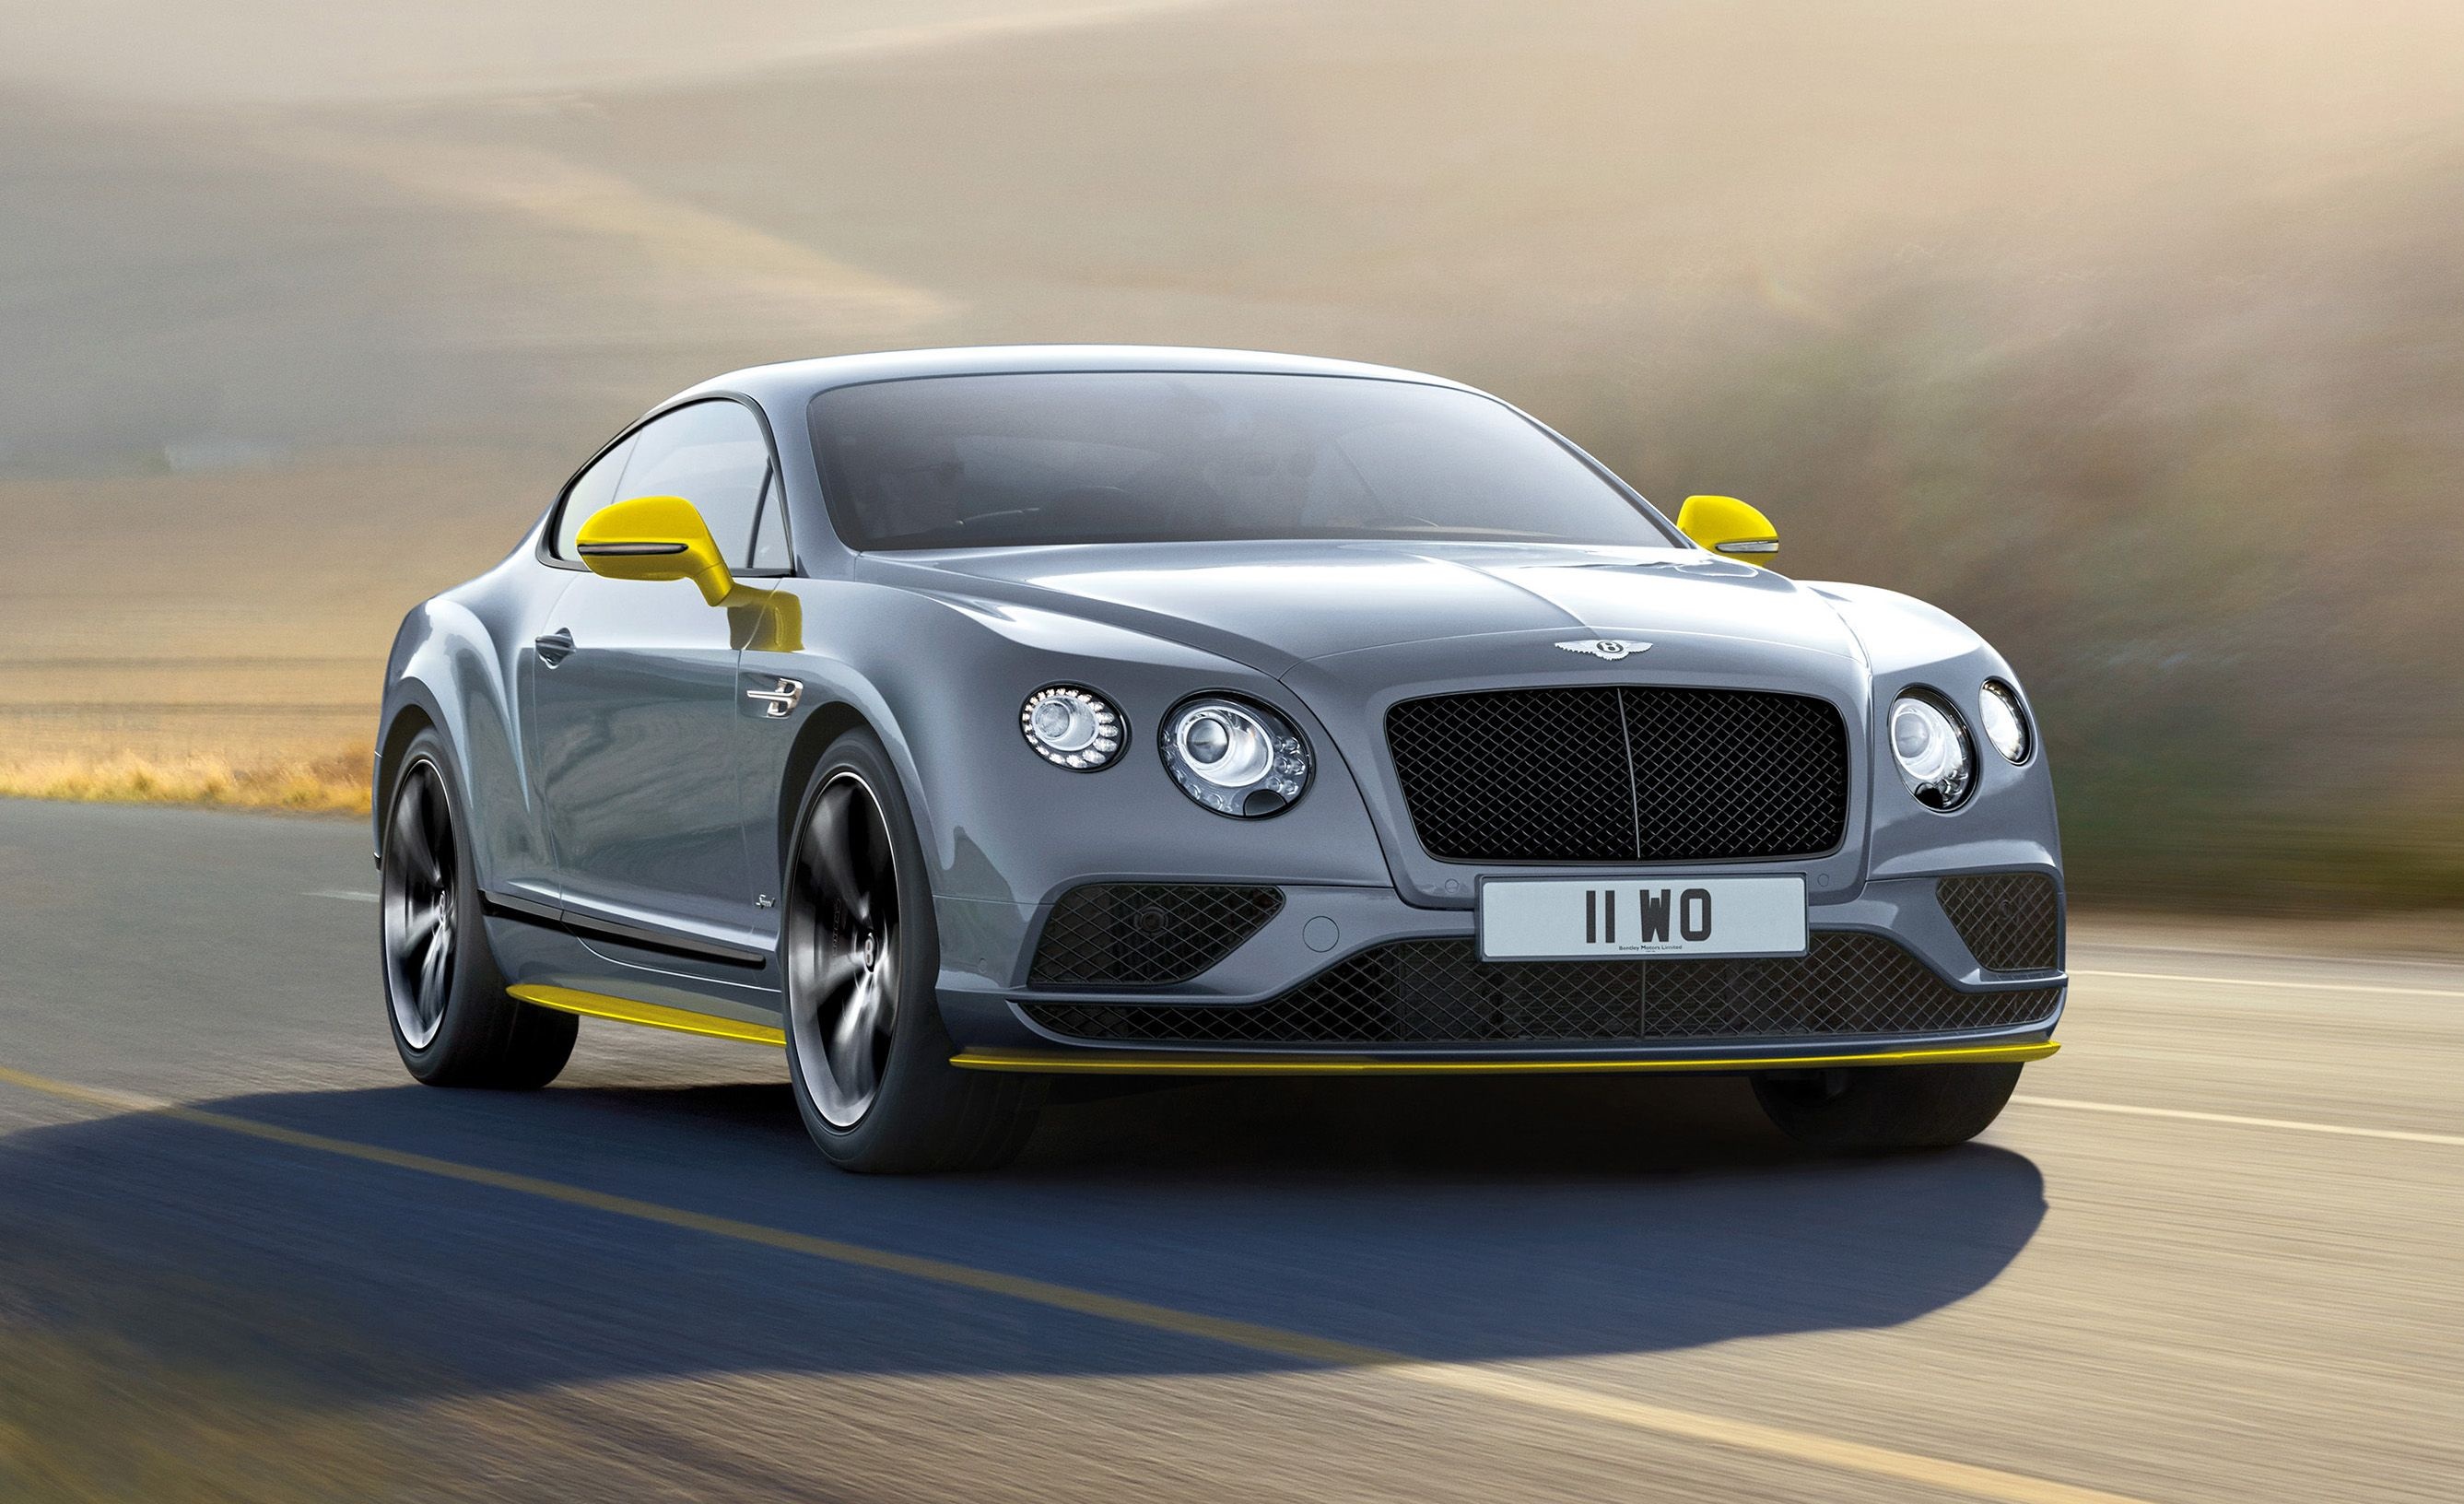 Bentley Continental GT (Auto), Speed and power, HD wallpapers and photos, Luxury car experience, 2680x1640 HD Desktop